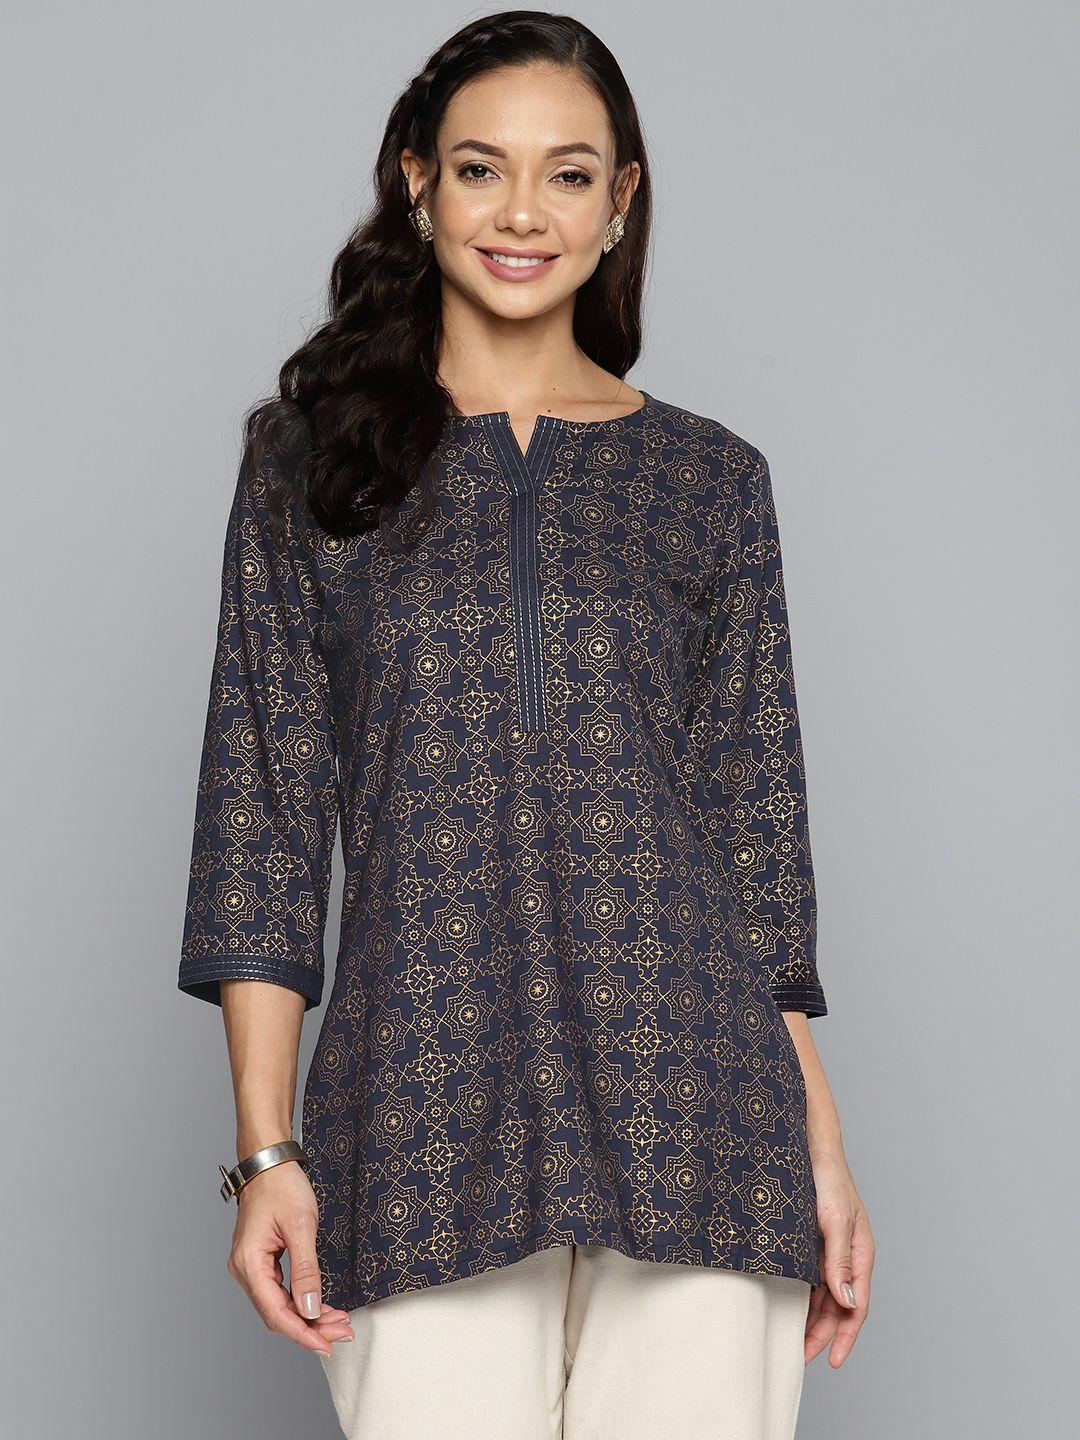 here&now ethnic motifs printed pure cotton kurti